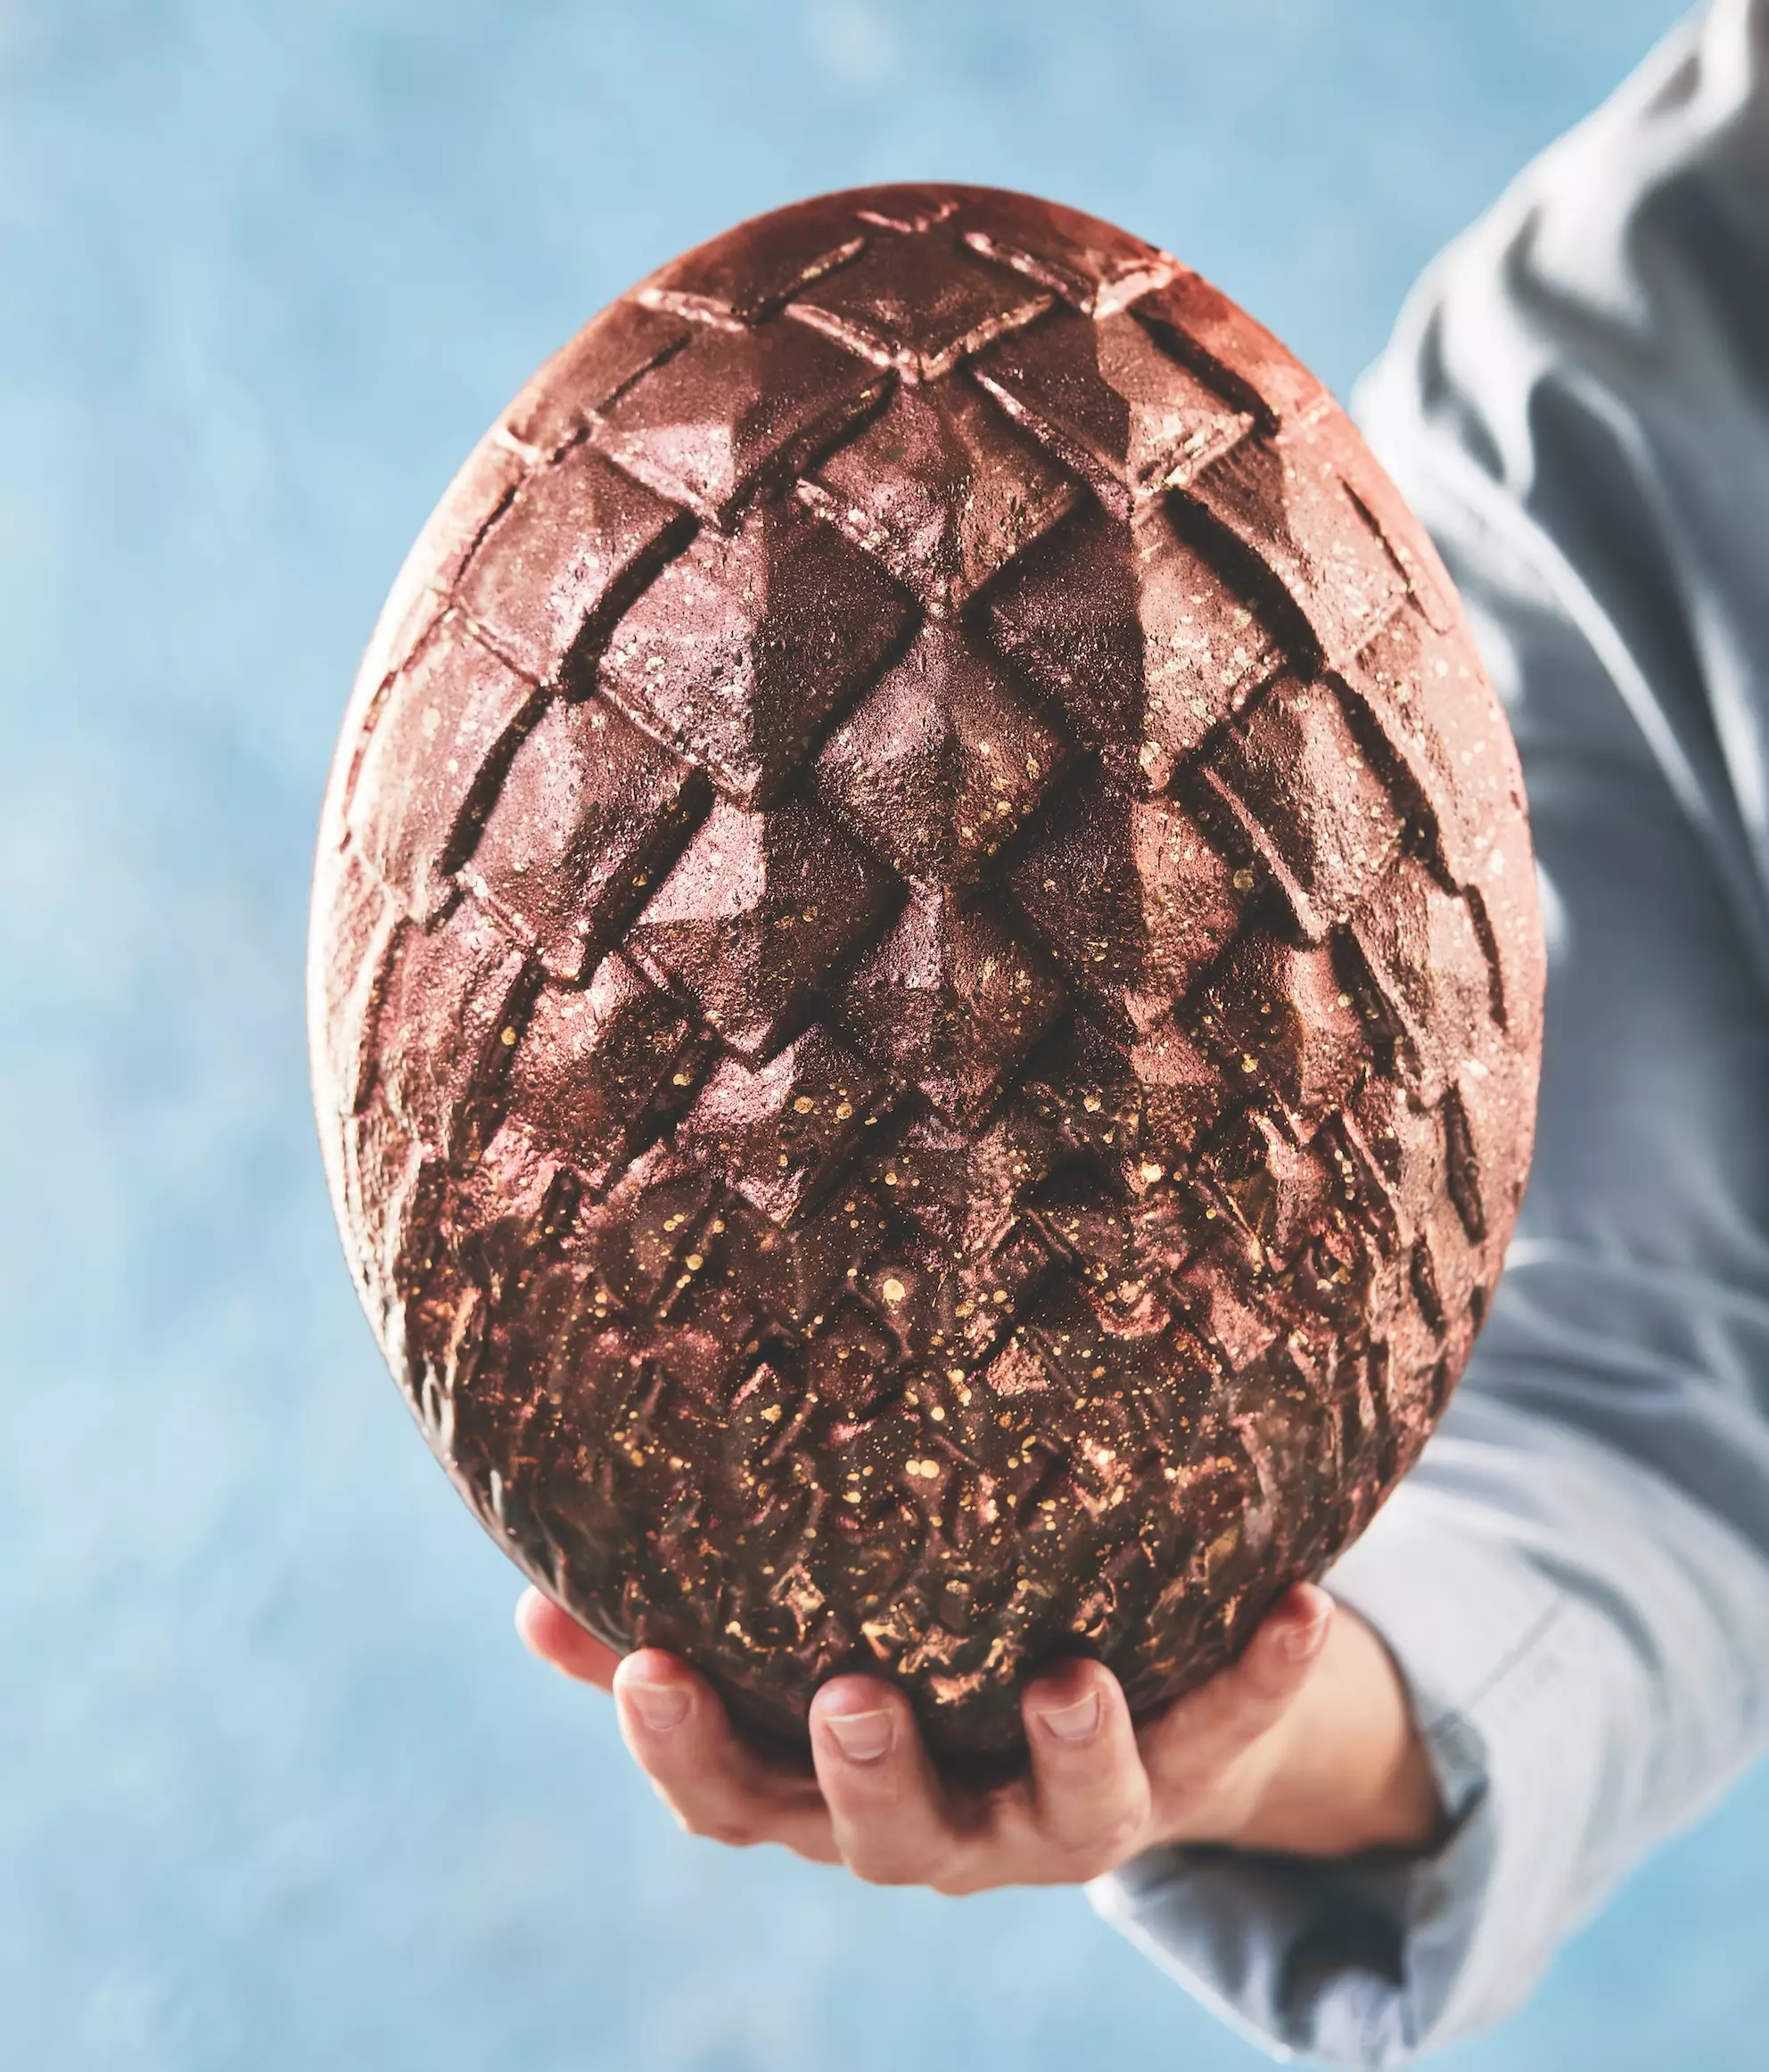 This milk chocolate dragon egg has been finished with metallic ombre (